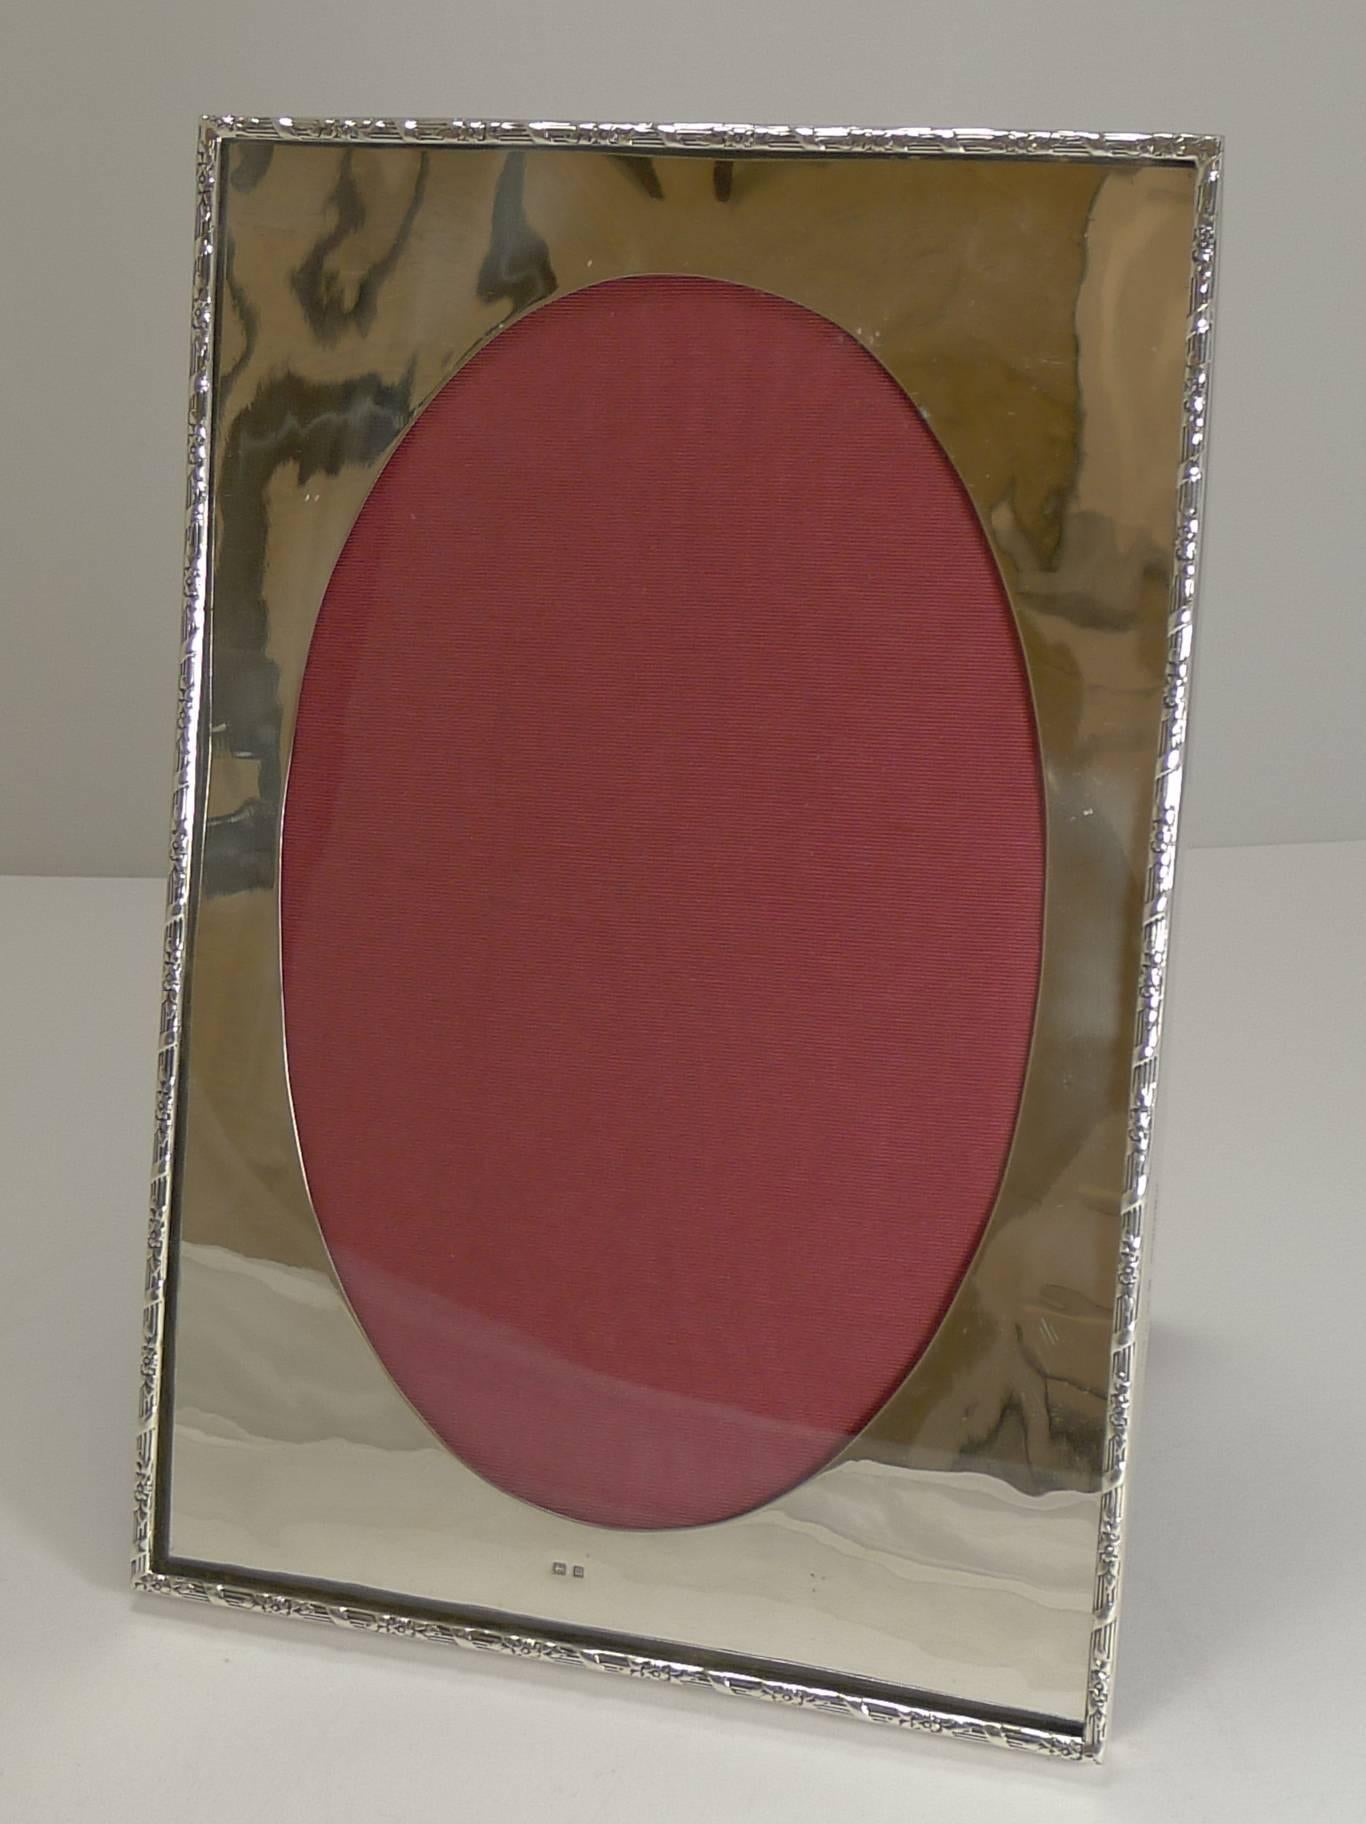 A truly grand and special photograph frame for your cherished picture. It is able to be used in both landscape and portrait configurations with the solid Oak backing with folding easel stand being able to accommodate both ways.

Not only is the